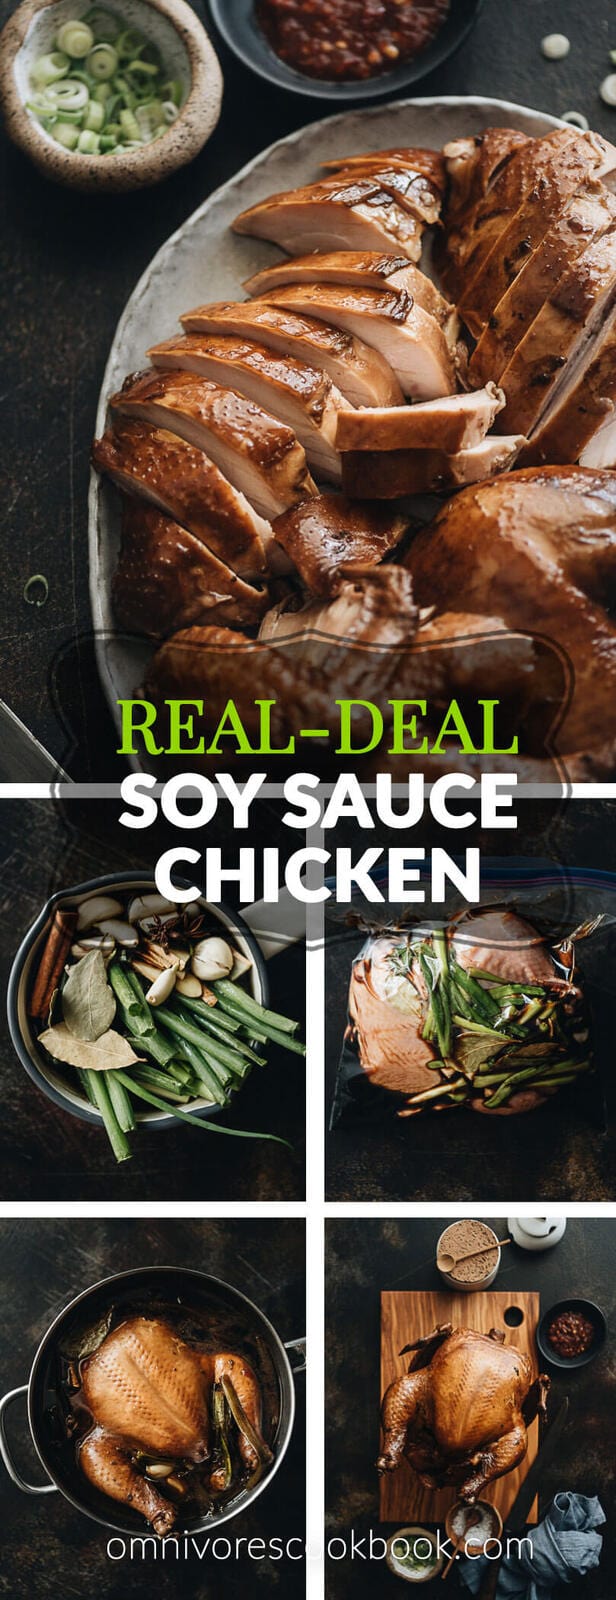 Chinese Soy Sauce Chicken - This homemade soy sauce chicken has silky tender meat with a deep savory flavor. Learn how easy it is to make this Cantonese dim sum at home and even achieve restaurant taste. #marinade #recipe #healthy #glutenfree #brownsugar